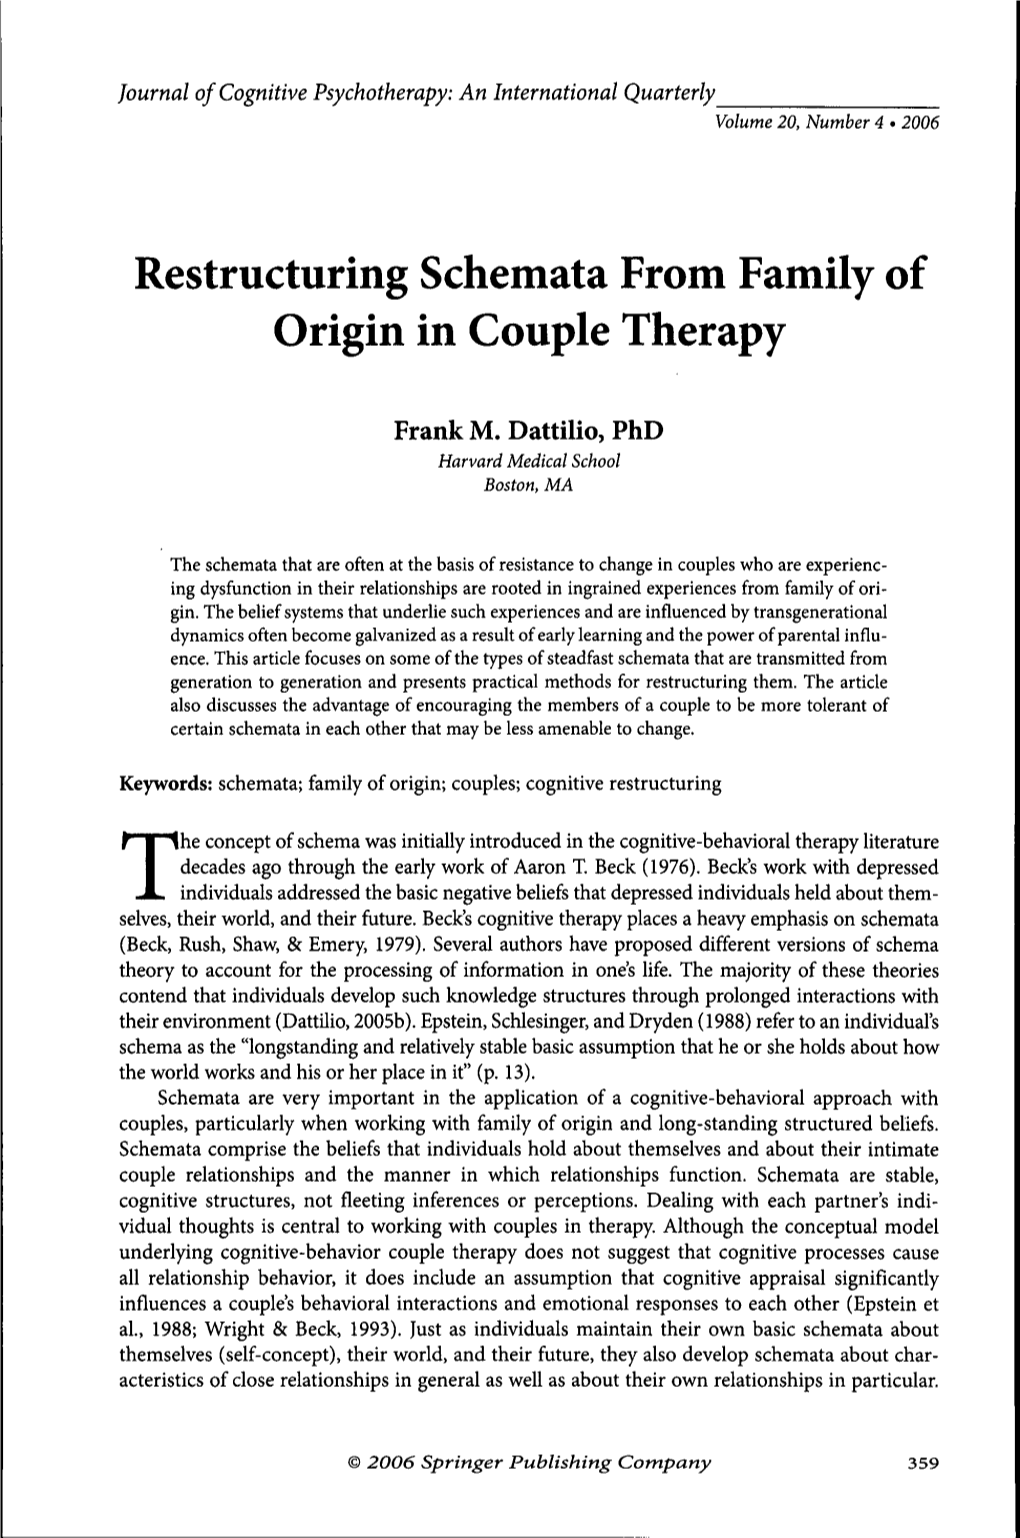 Restructuring Schemata from Family of Origin in Couple Therapy